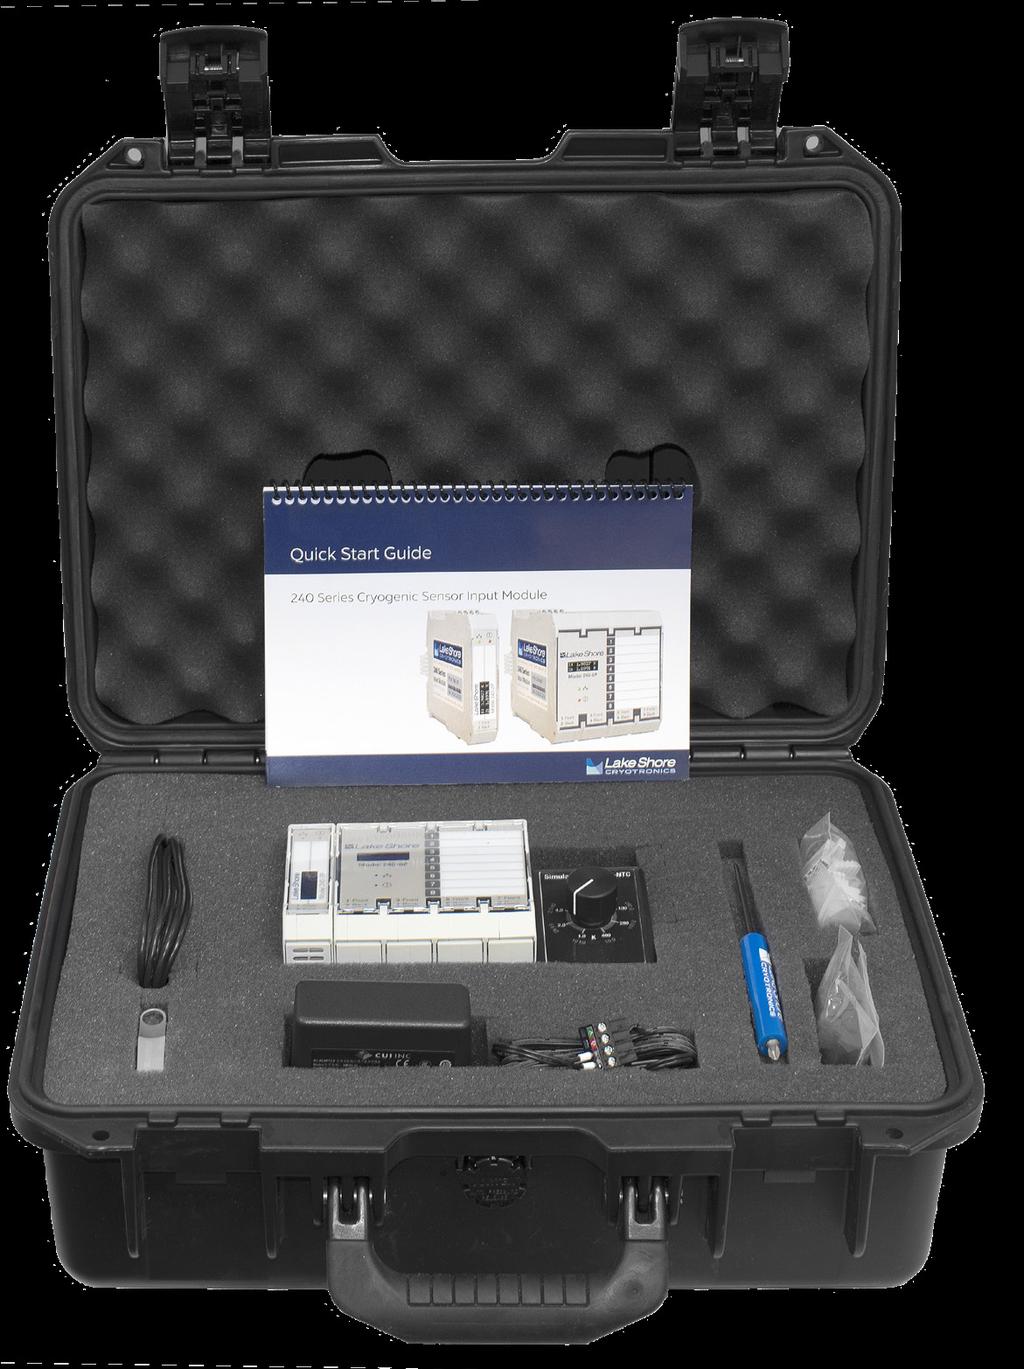 Getting to know the 40 Series A convenient self-contained kit provides most of the components required to evaluate these modules in your systems.